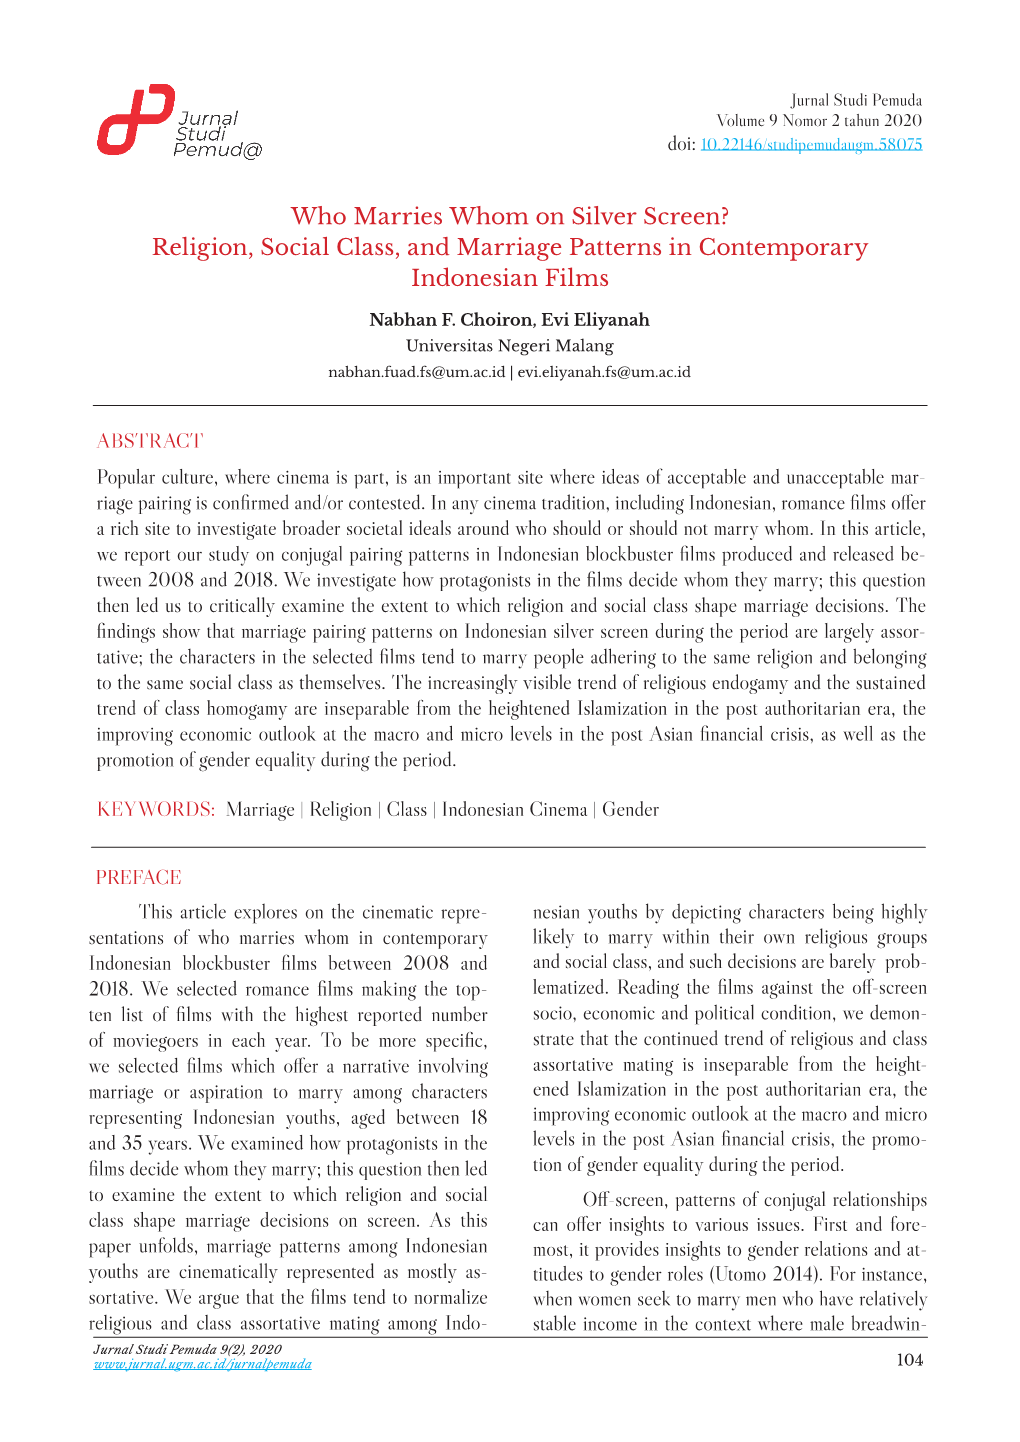 Who Marries Whom on Silver Screen? Religion, Social Class, and Marriage Patterns in Contemporary Indonesian Films